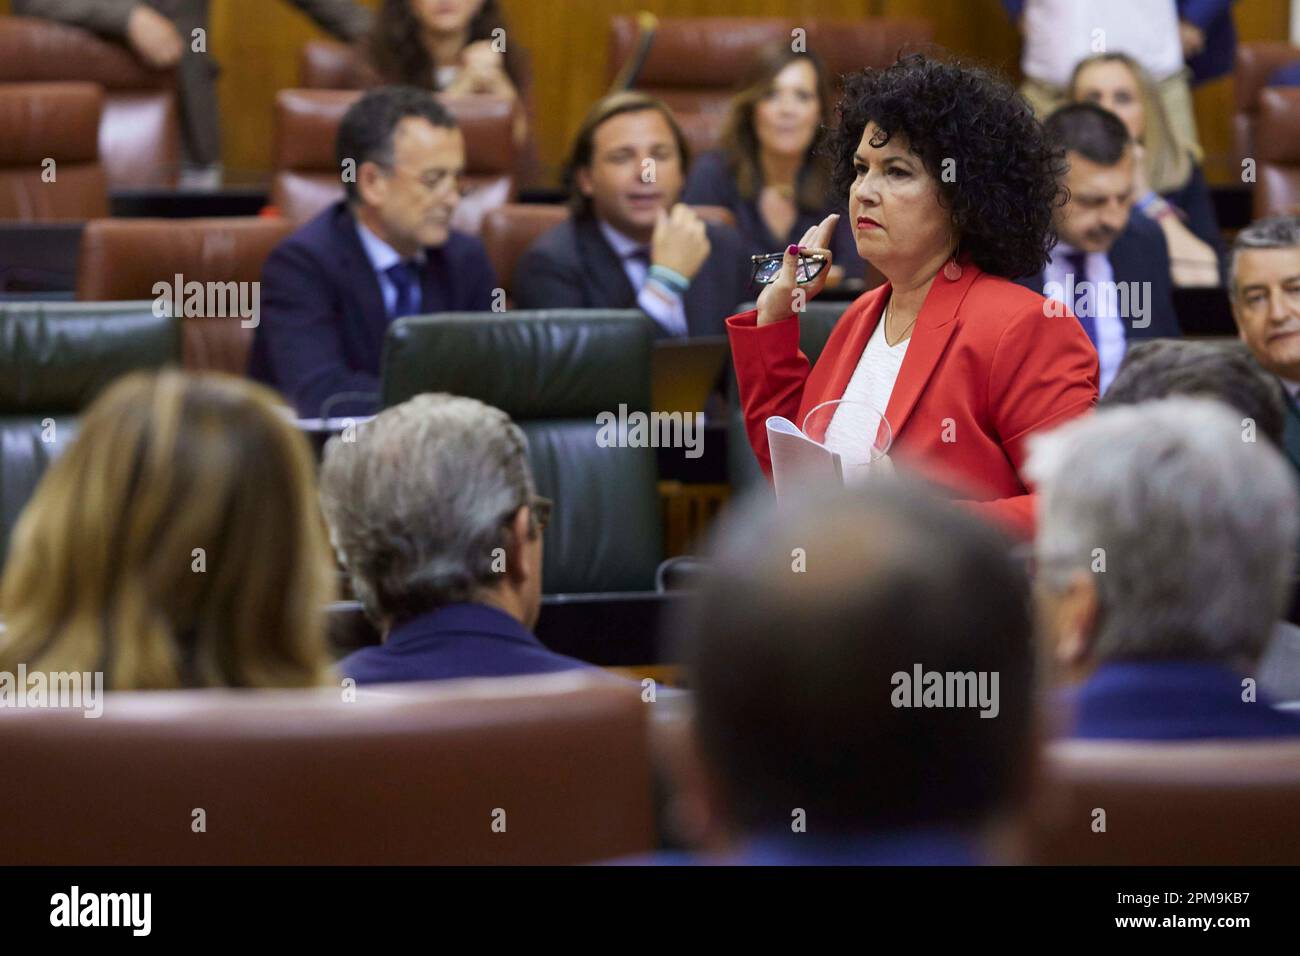 https://c8.alamy.com/comp/2PM9KB7/the-deputy-of-the-mixed-parliamentary-group-adelante-andaluca-maria-isabel-mora-after-her-intervention-during-the-first-day-of-the-plenary-session-of-the-andalusian-parliament-in-the-parliament-of-andalusia-on-april-12-2023-in-seville-andalusia-spain-in-the-twelfth-session-of-the-plenary-of-this-xii-legislature-in-the-agenda-is-debated-the-proposal-of-law-of-doana-and-the-law-of-flamenco-12-april-2023-joaquin-corchero-europa-press-04122023-europa-press-via-ap-2PM9KB7.jpg